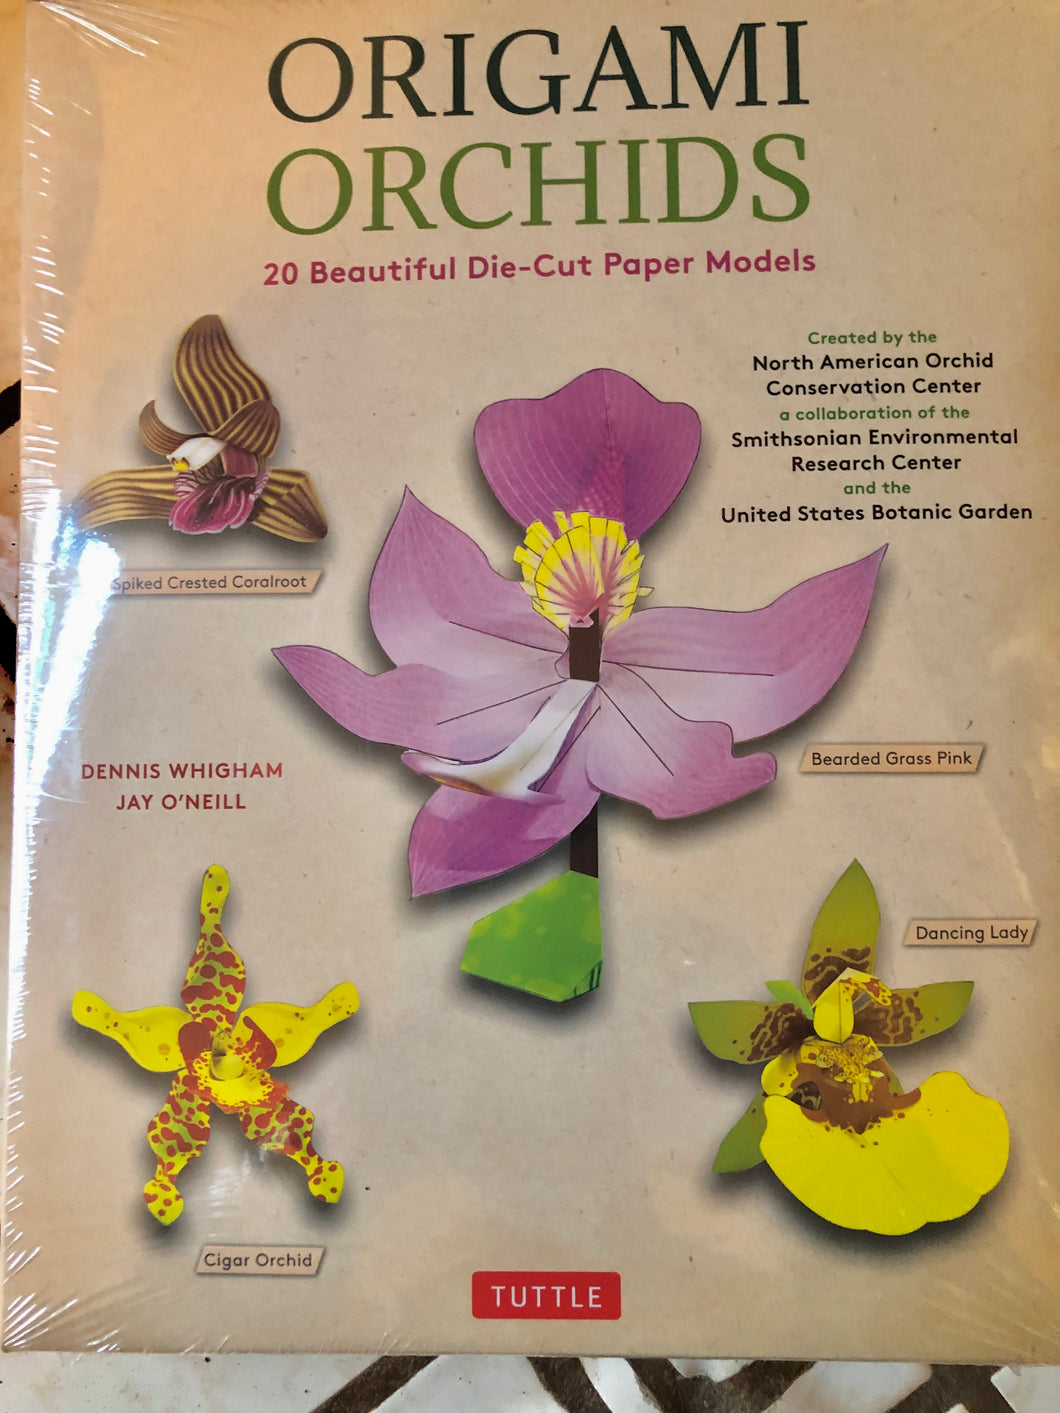 ORCHID-GAMI